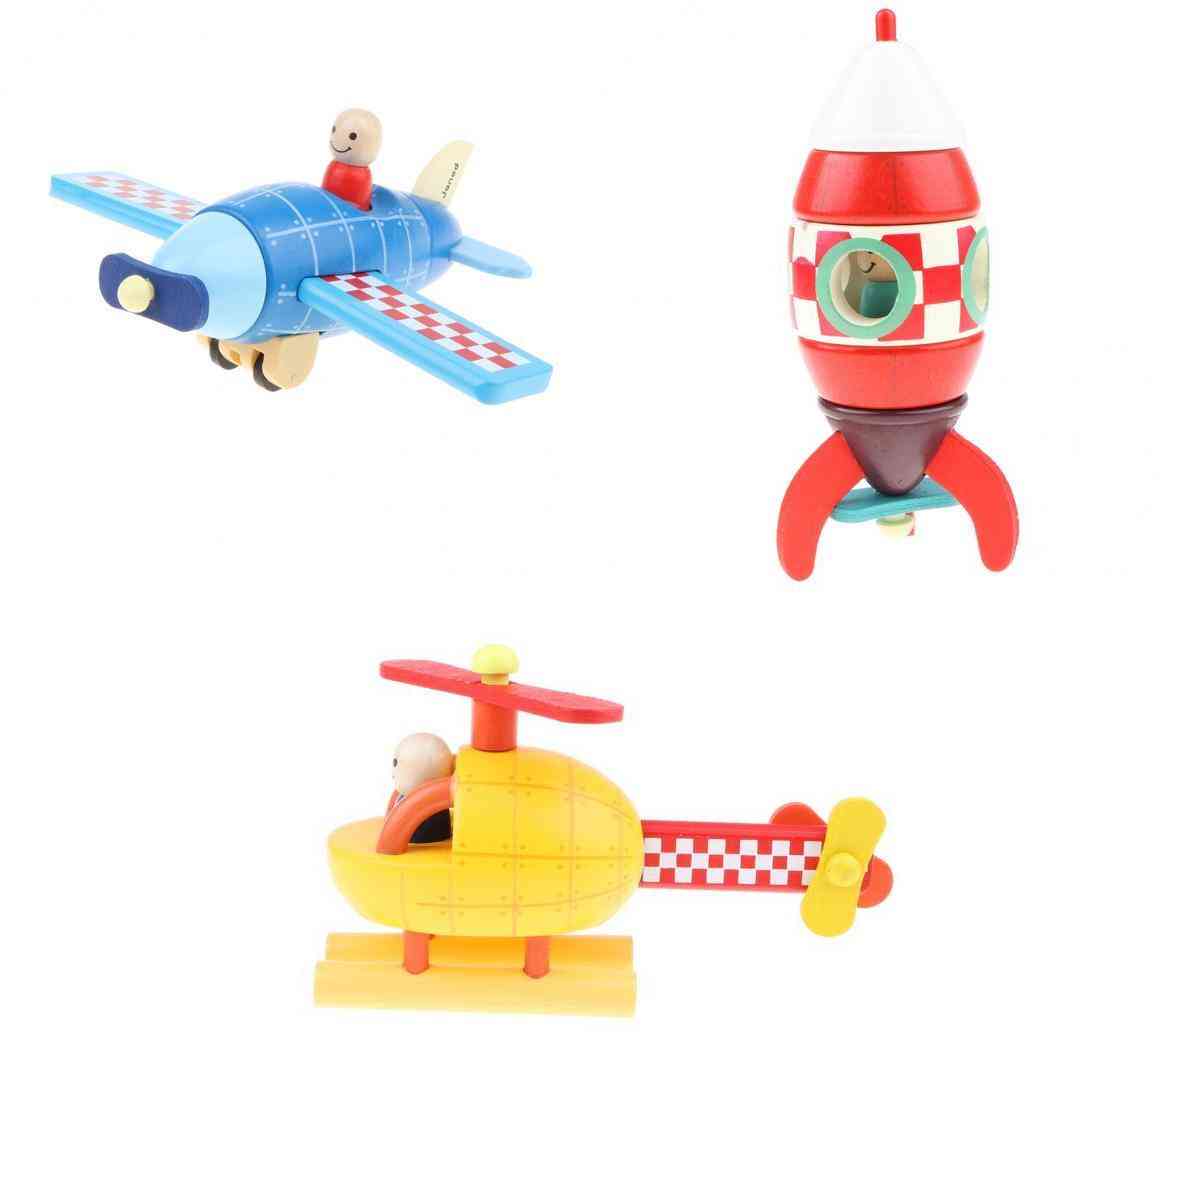 Wooden Assembled Magnetic Aircraft Model For Kids Toddlers Educational Toy,